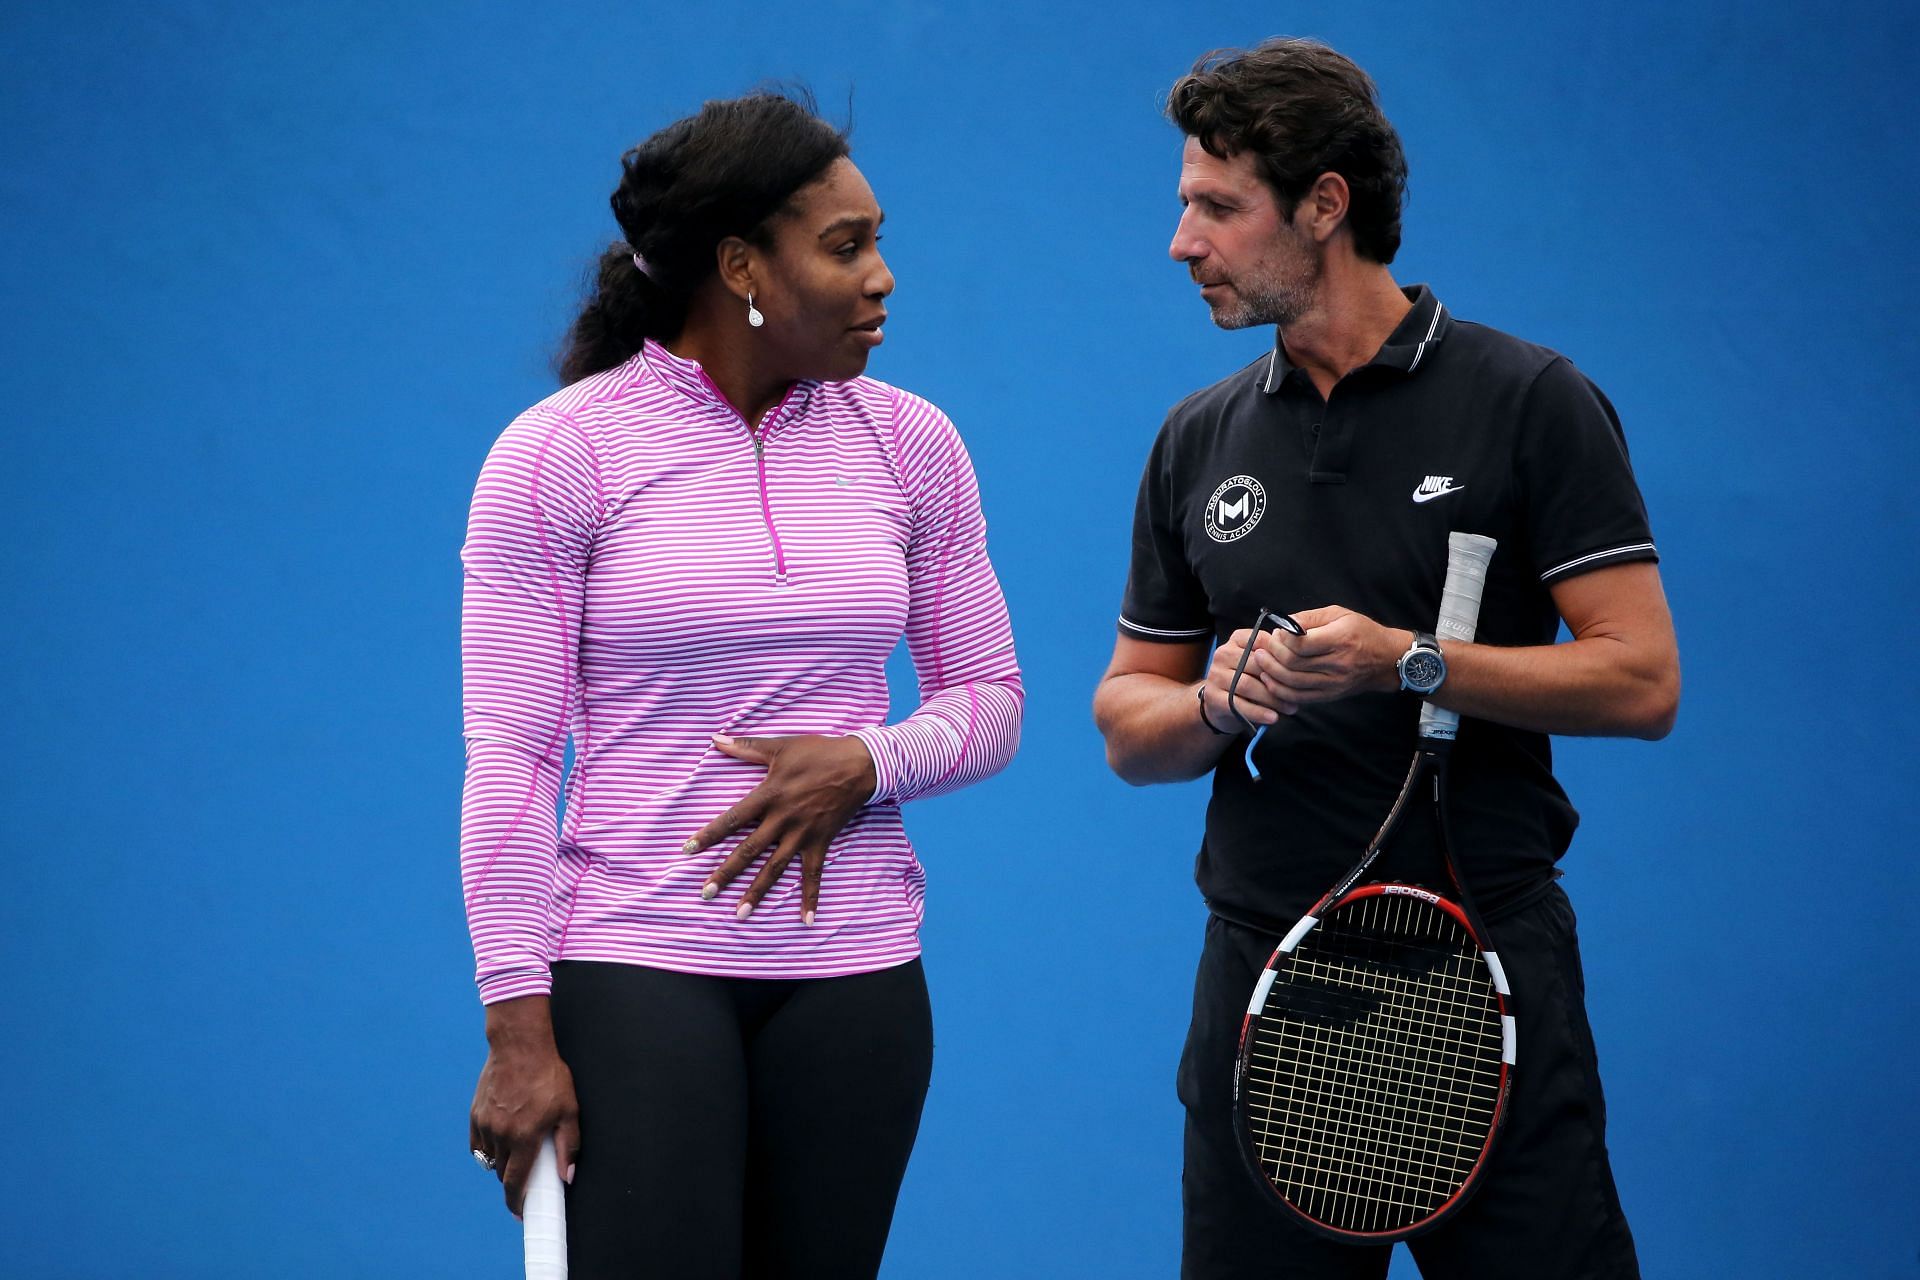 Serena Williams and Patrick Mouratoglou pictured at the 2016 Australian Open.